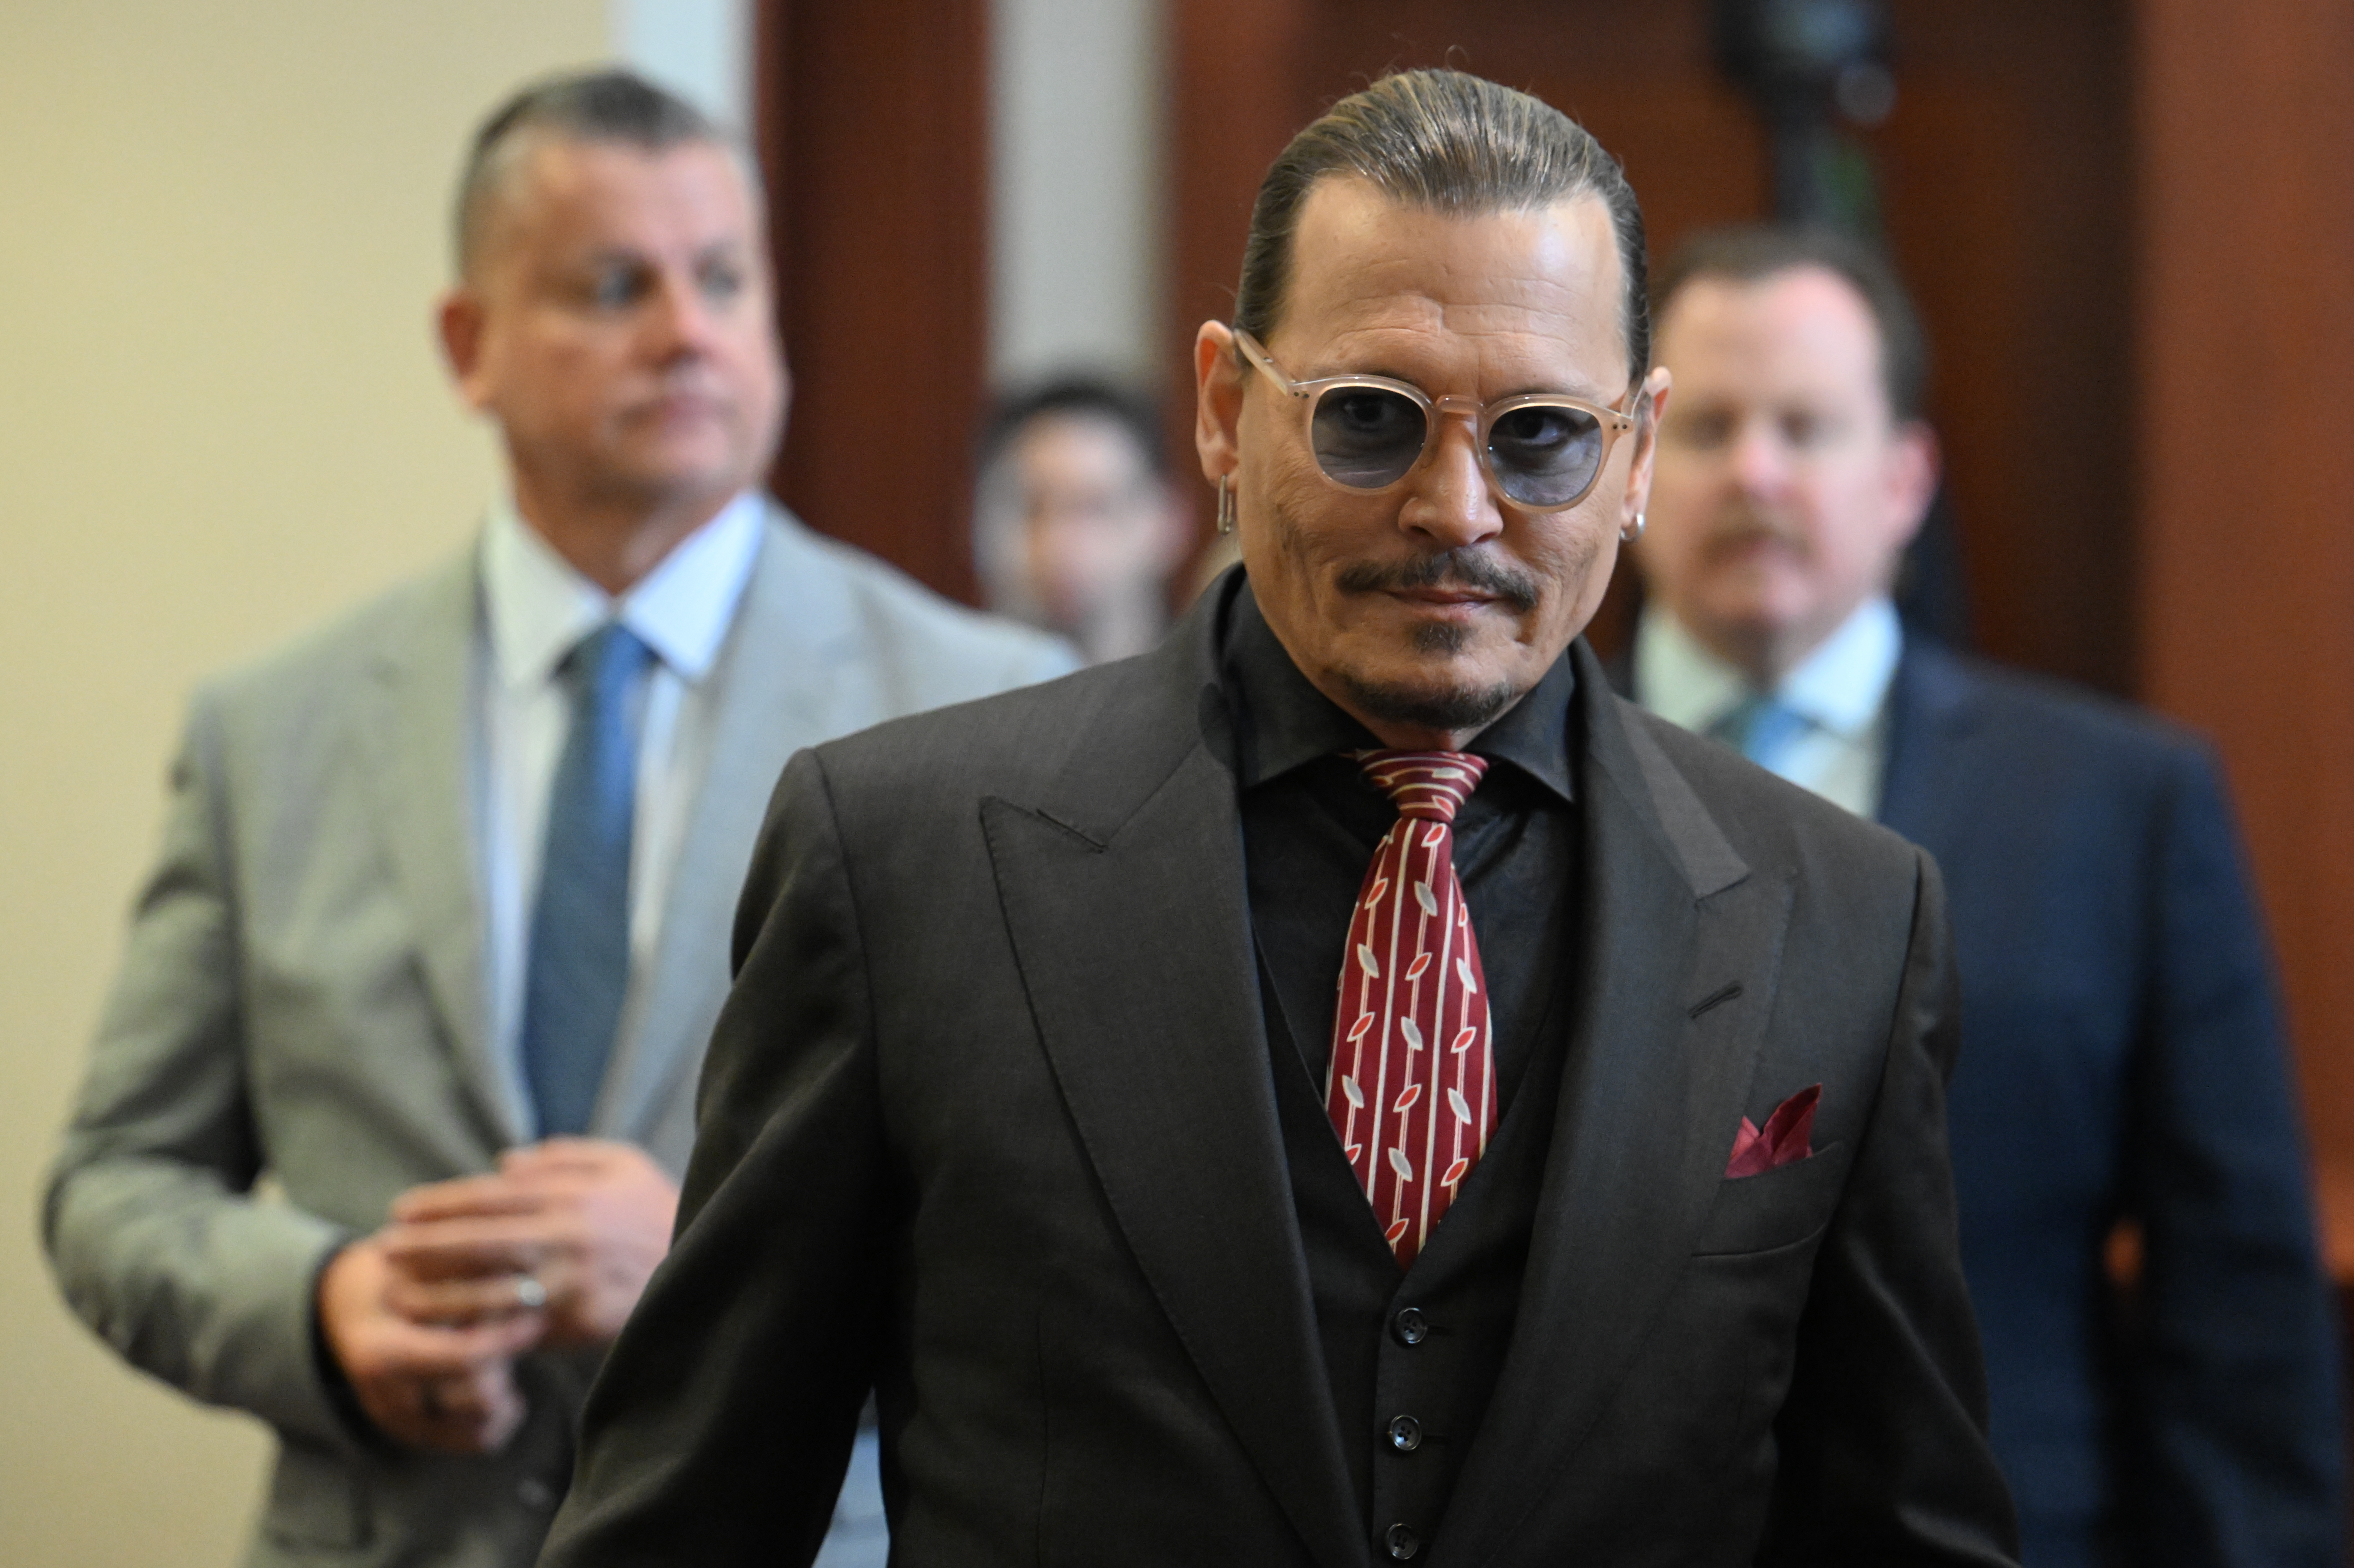 Actor Johnny Depp arrives in the courtroom at the Fairfax County Circuit Court in Fairfax, Va., Tuesday May 3, 2022.  